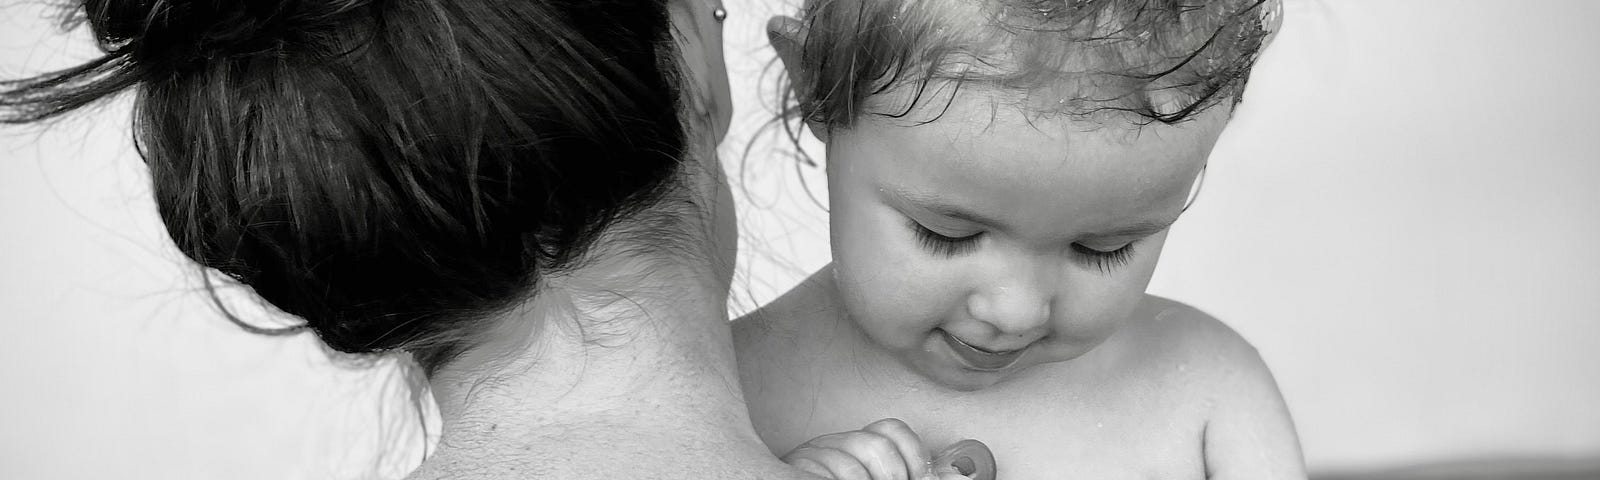 A black and white photo of a mother and her daughter embracing in a bathtub